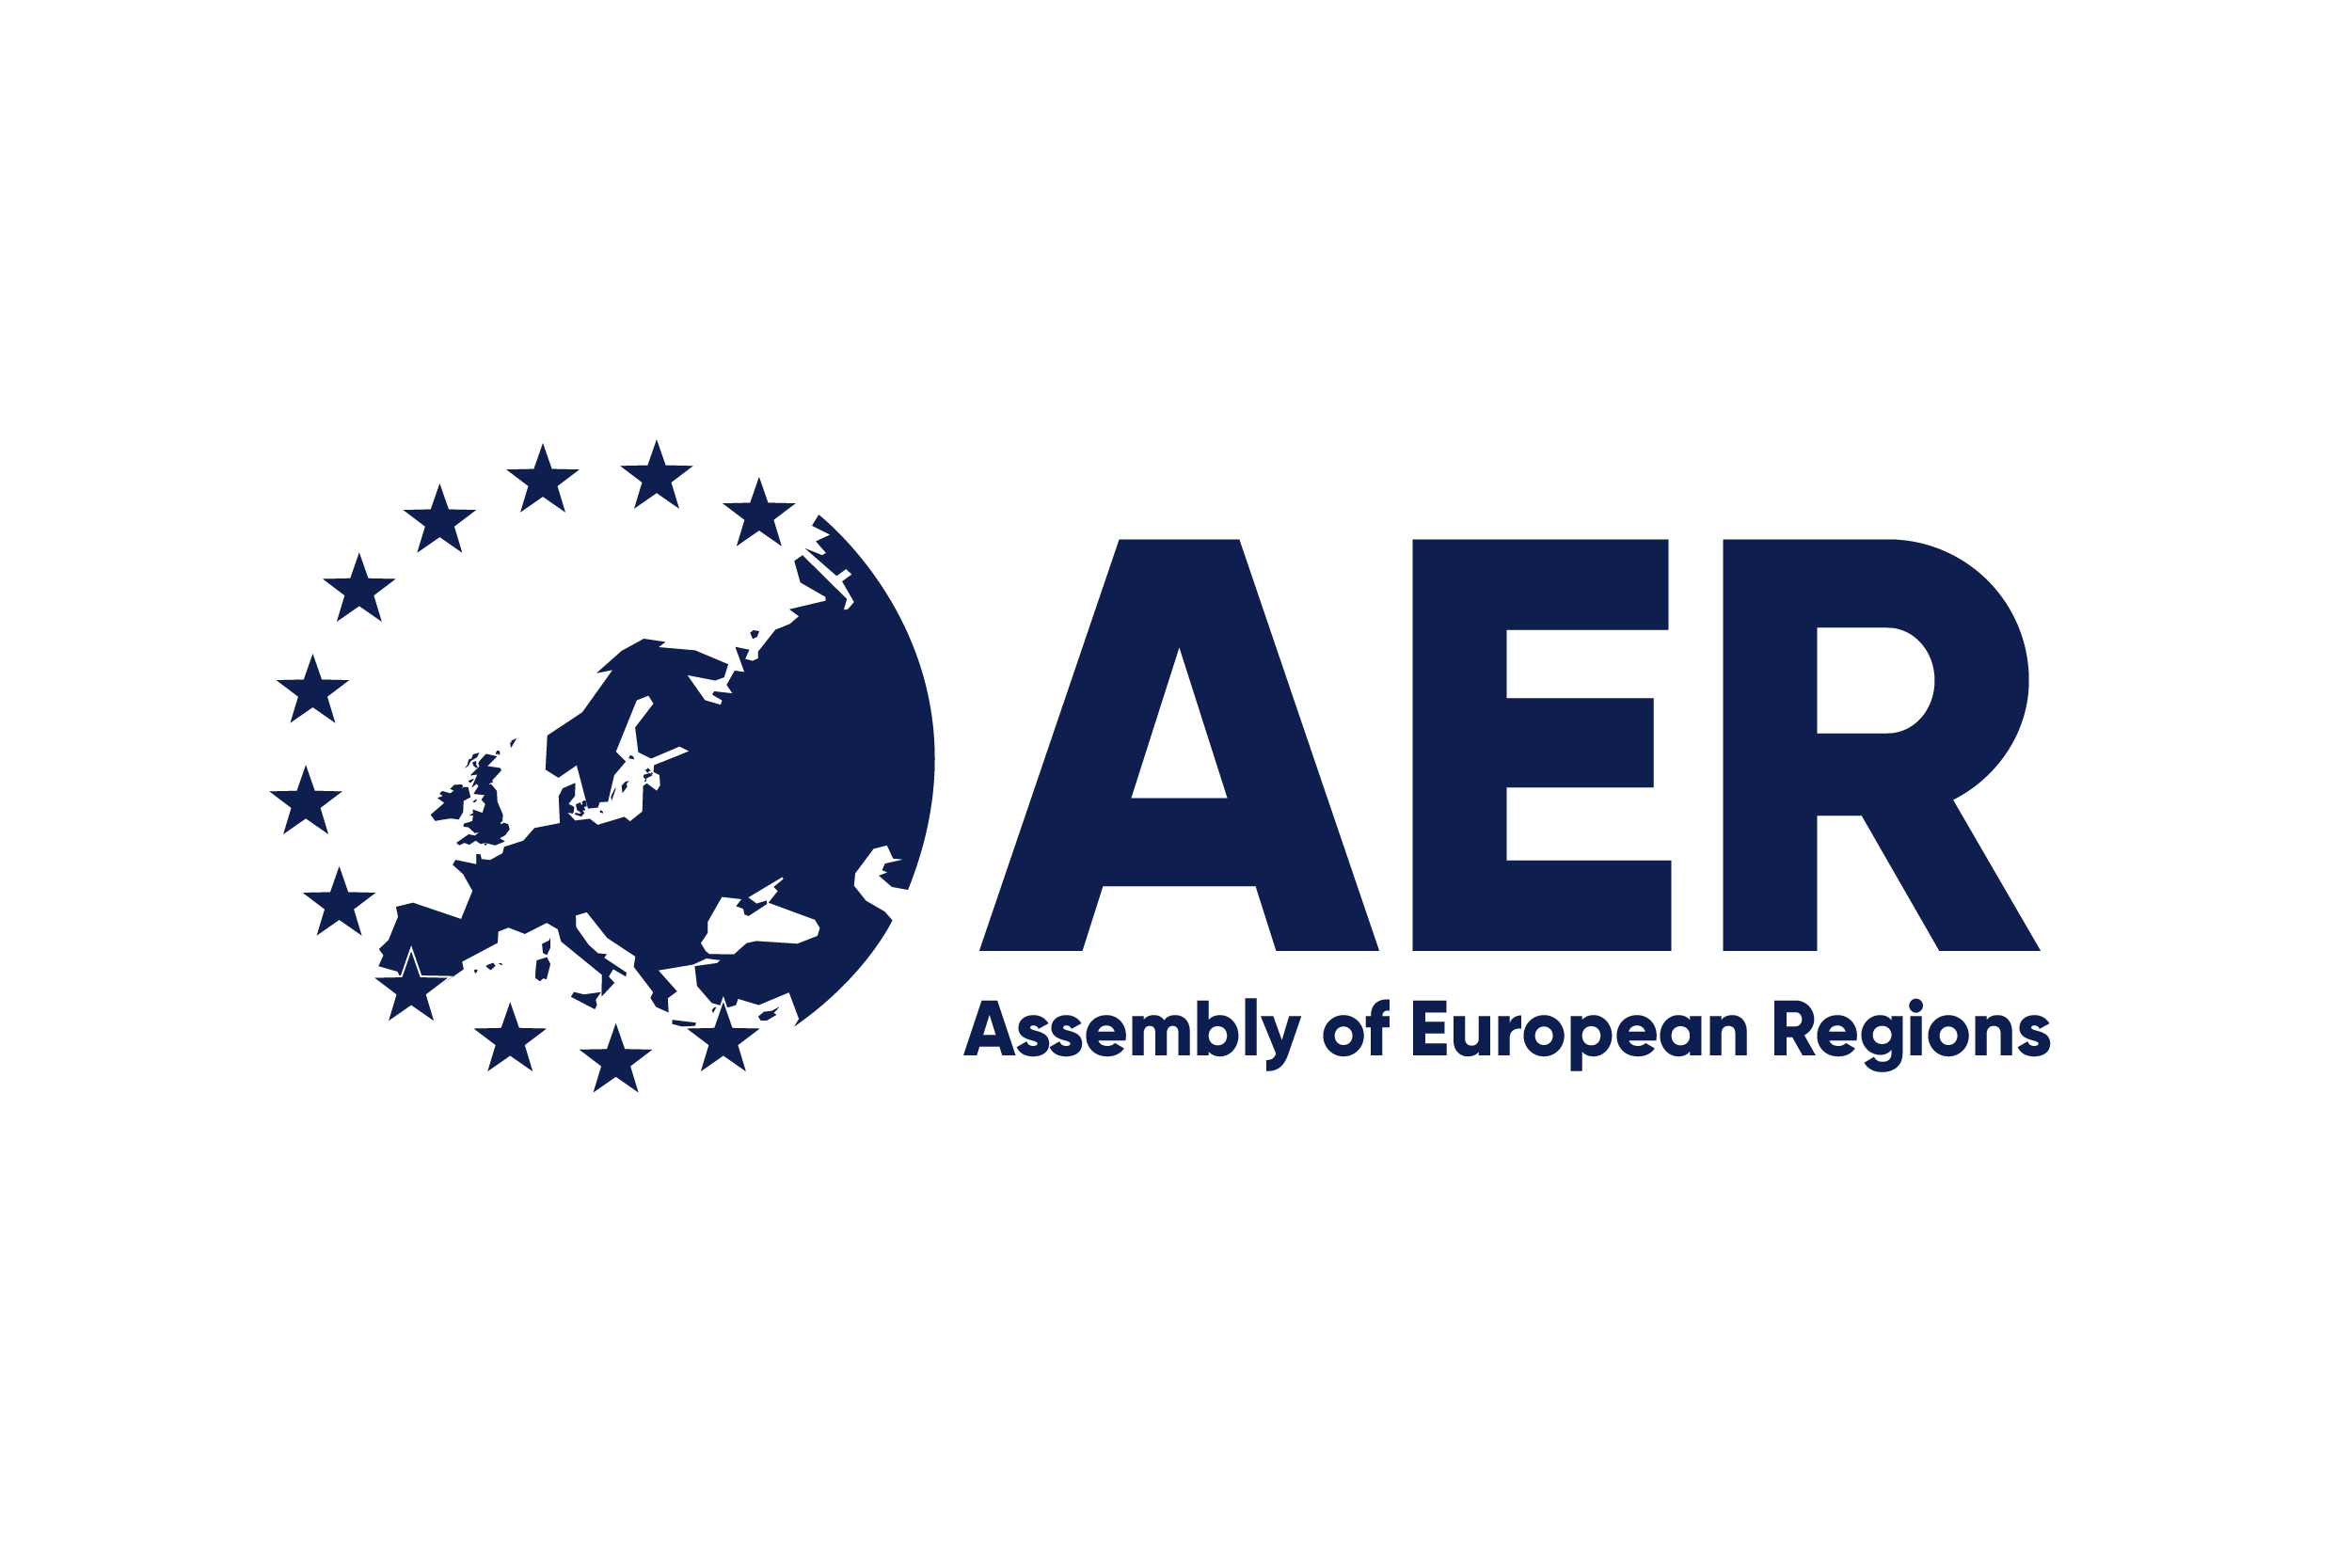 Regions Logo - Assembly of European Regions, Author at Citizens For Europe